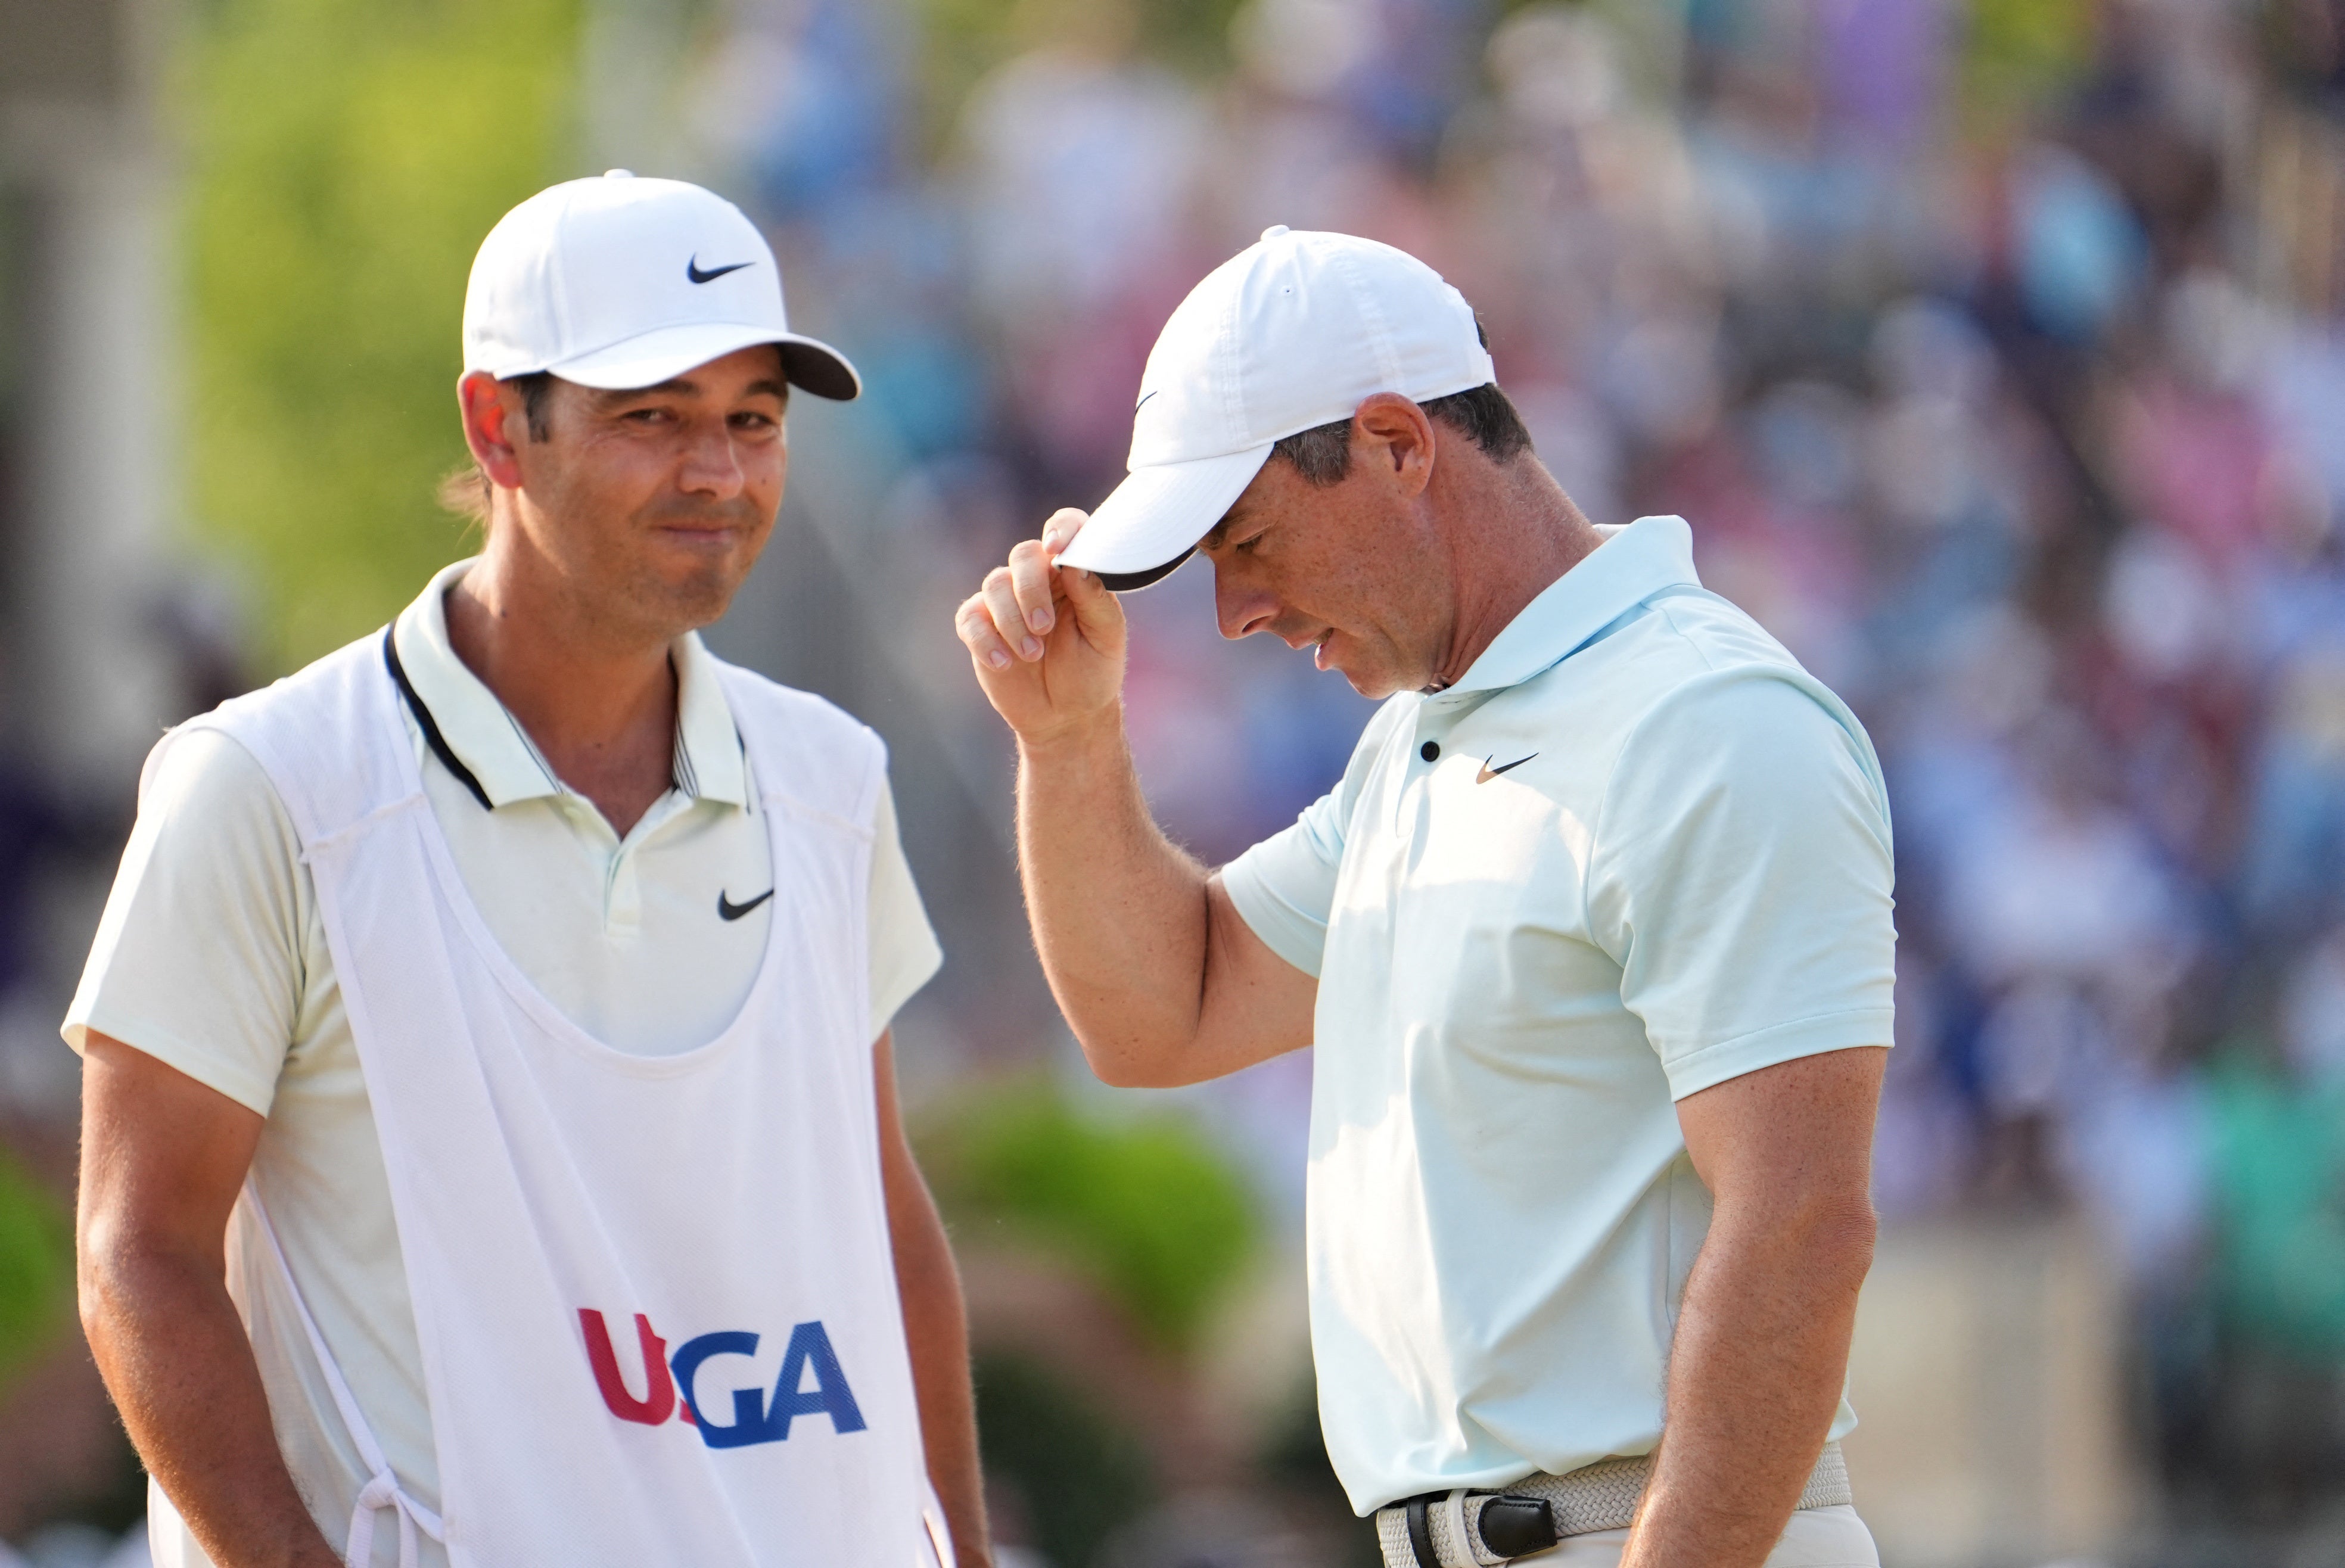 rory mcilroy, bryson dechambeau, us open, nick faldo, rory mcilroy ‘will be haunted for the rest of his life’ after choking golden opportunity to end major drought